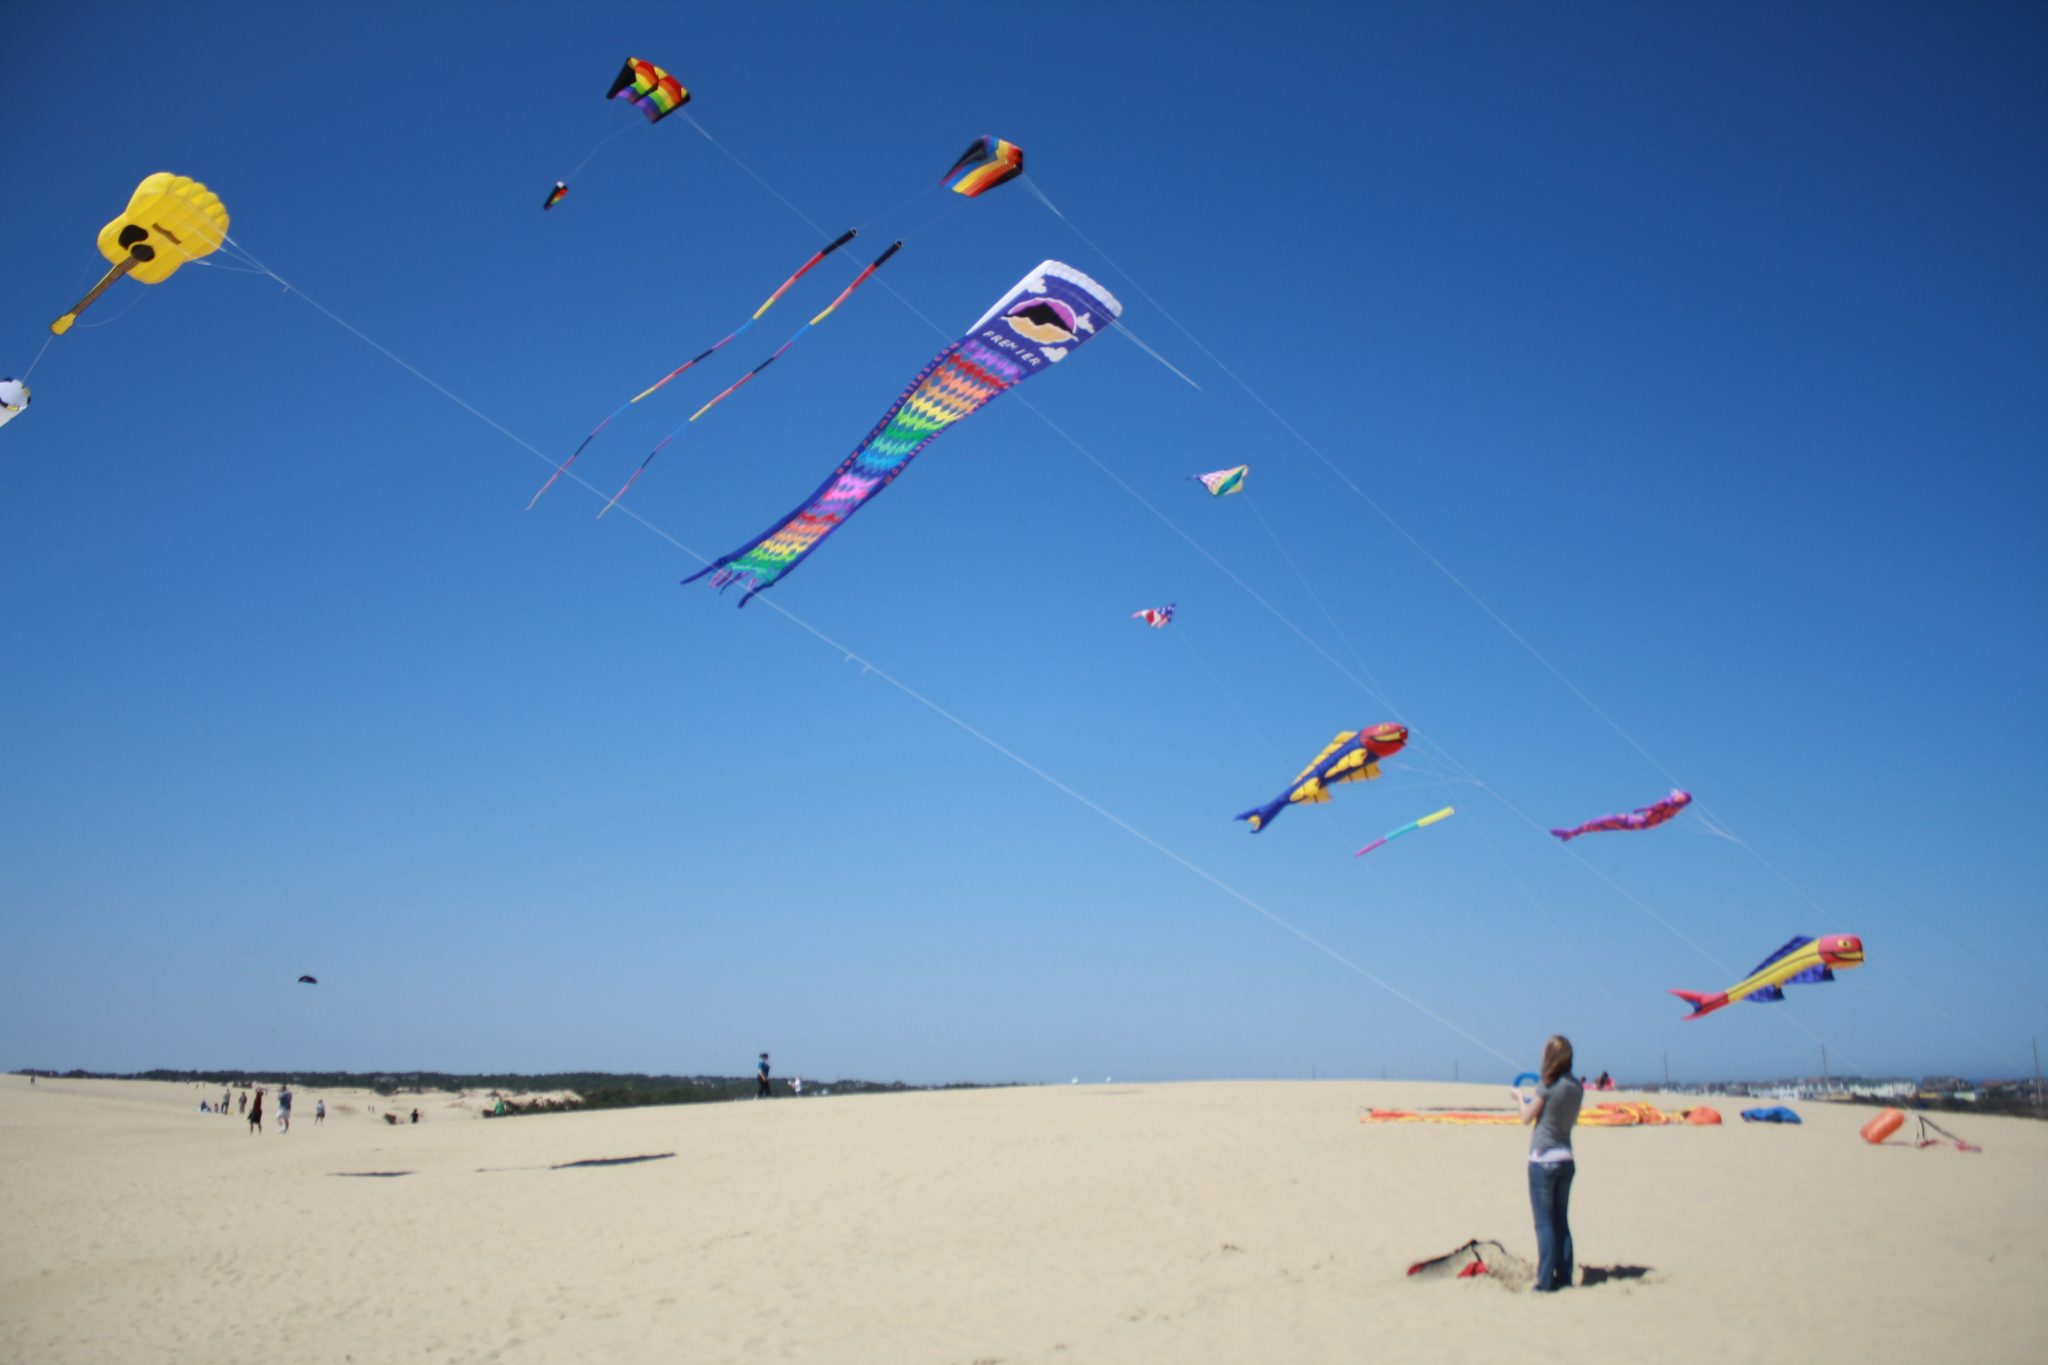 Fly Into Spring & Easter Eggstravaganza | Kitty Hawk Kites